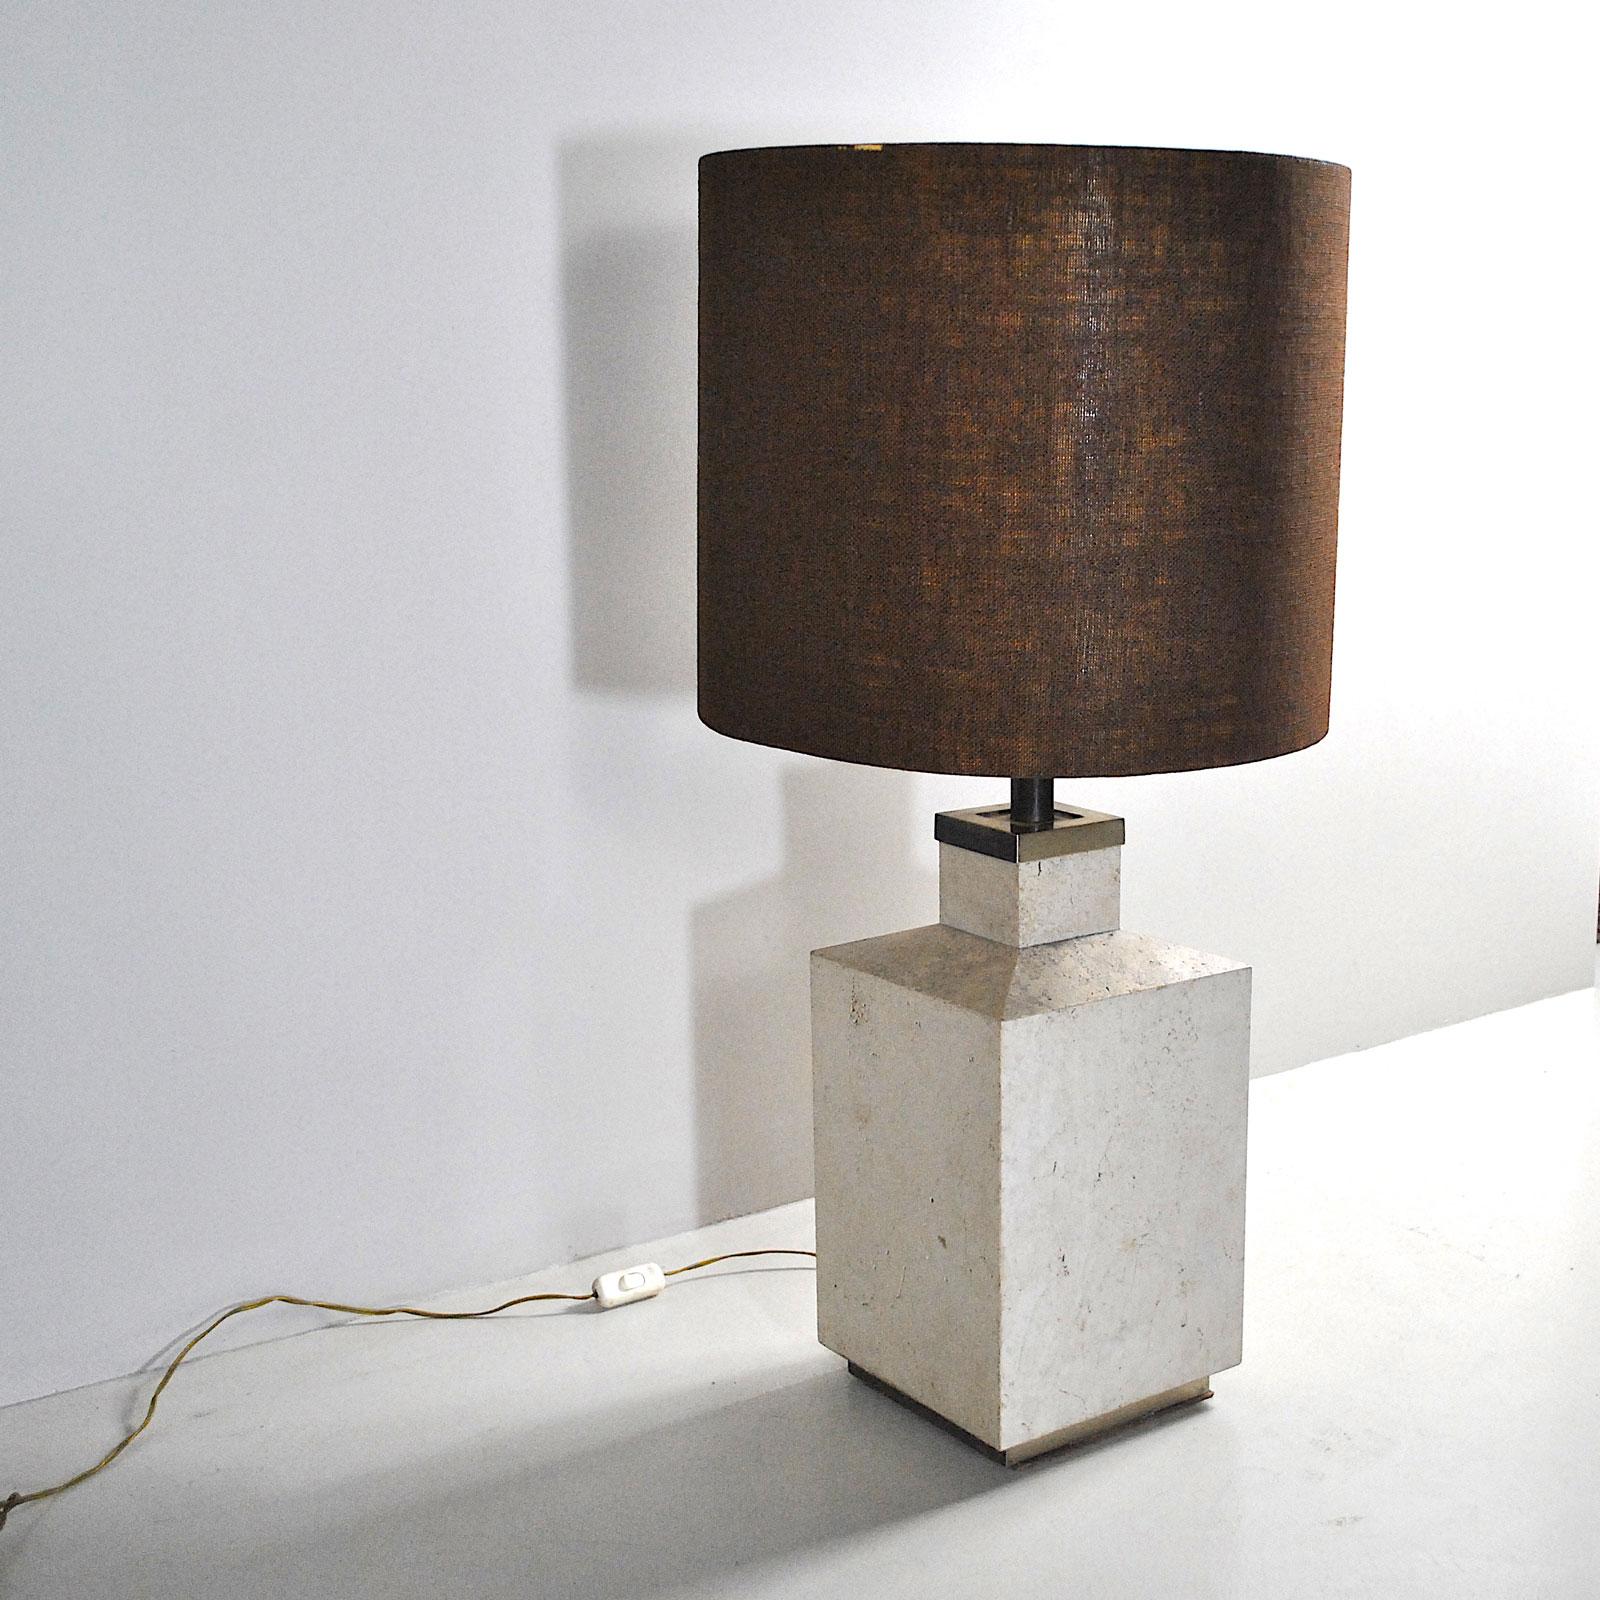 Steel Italian Midcentury Table Lamp Form the 1970s For Sale